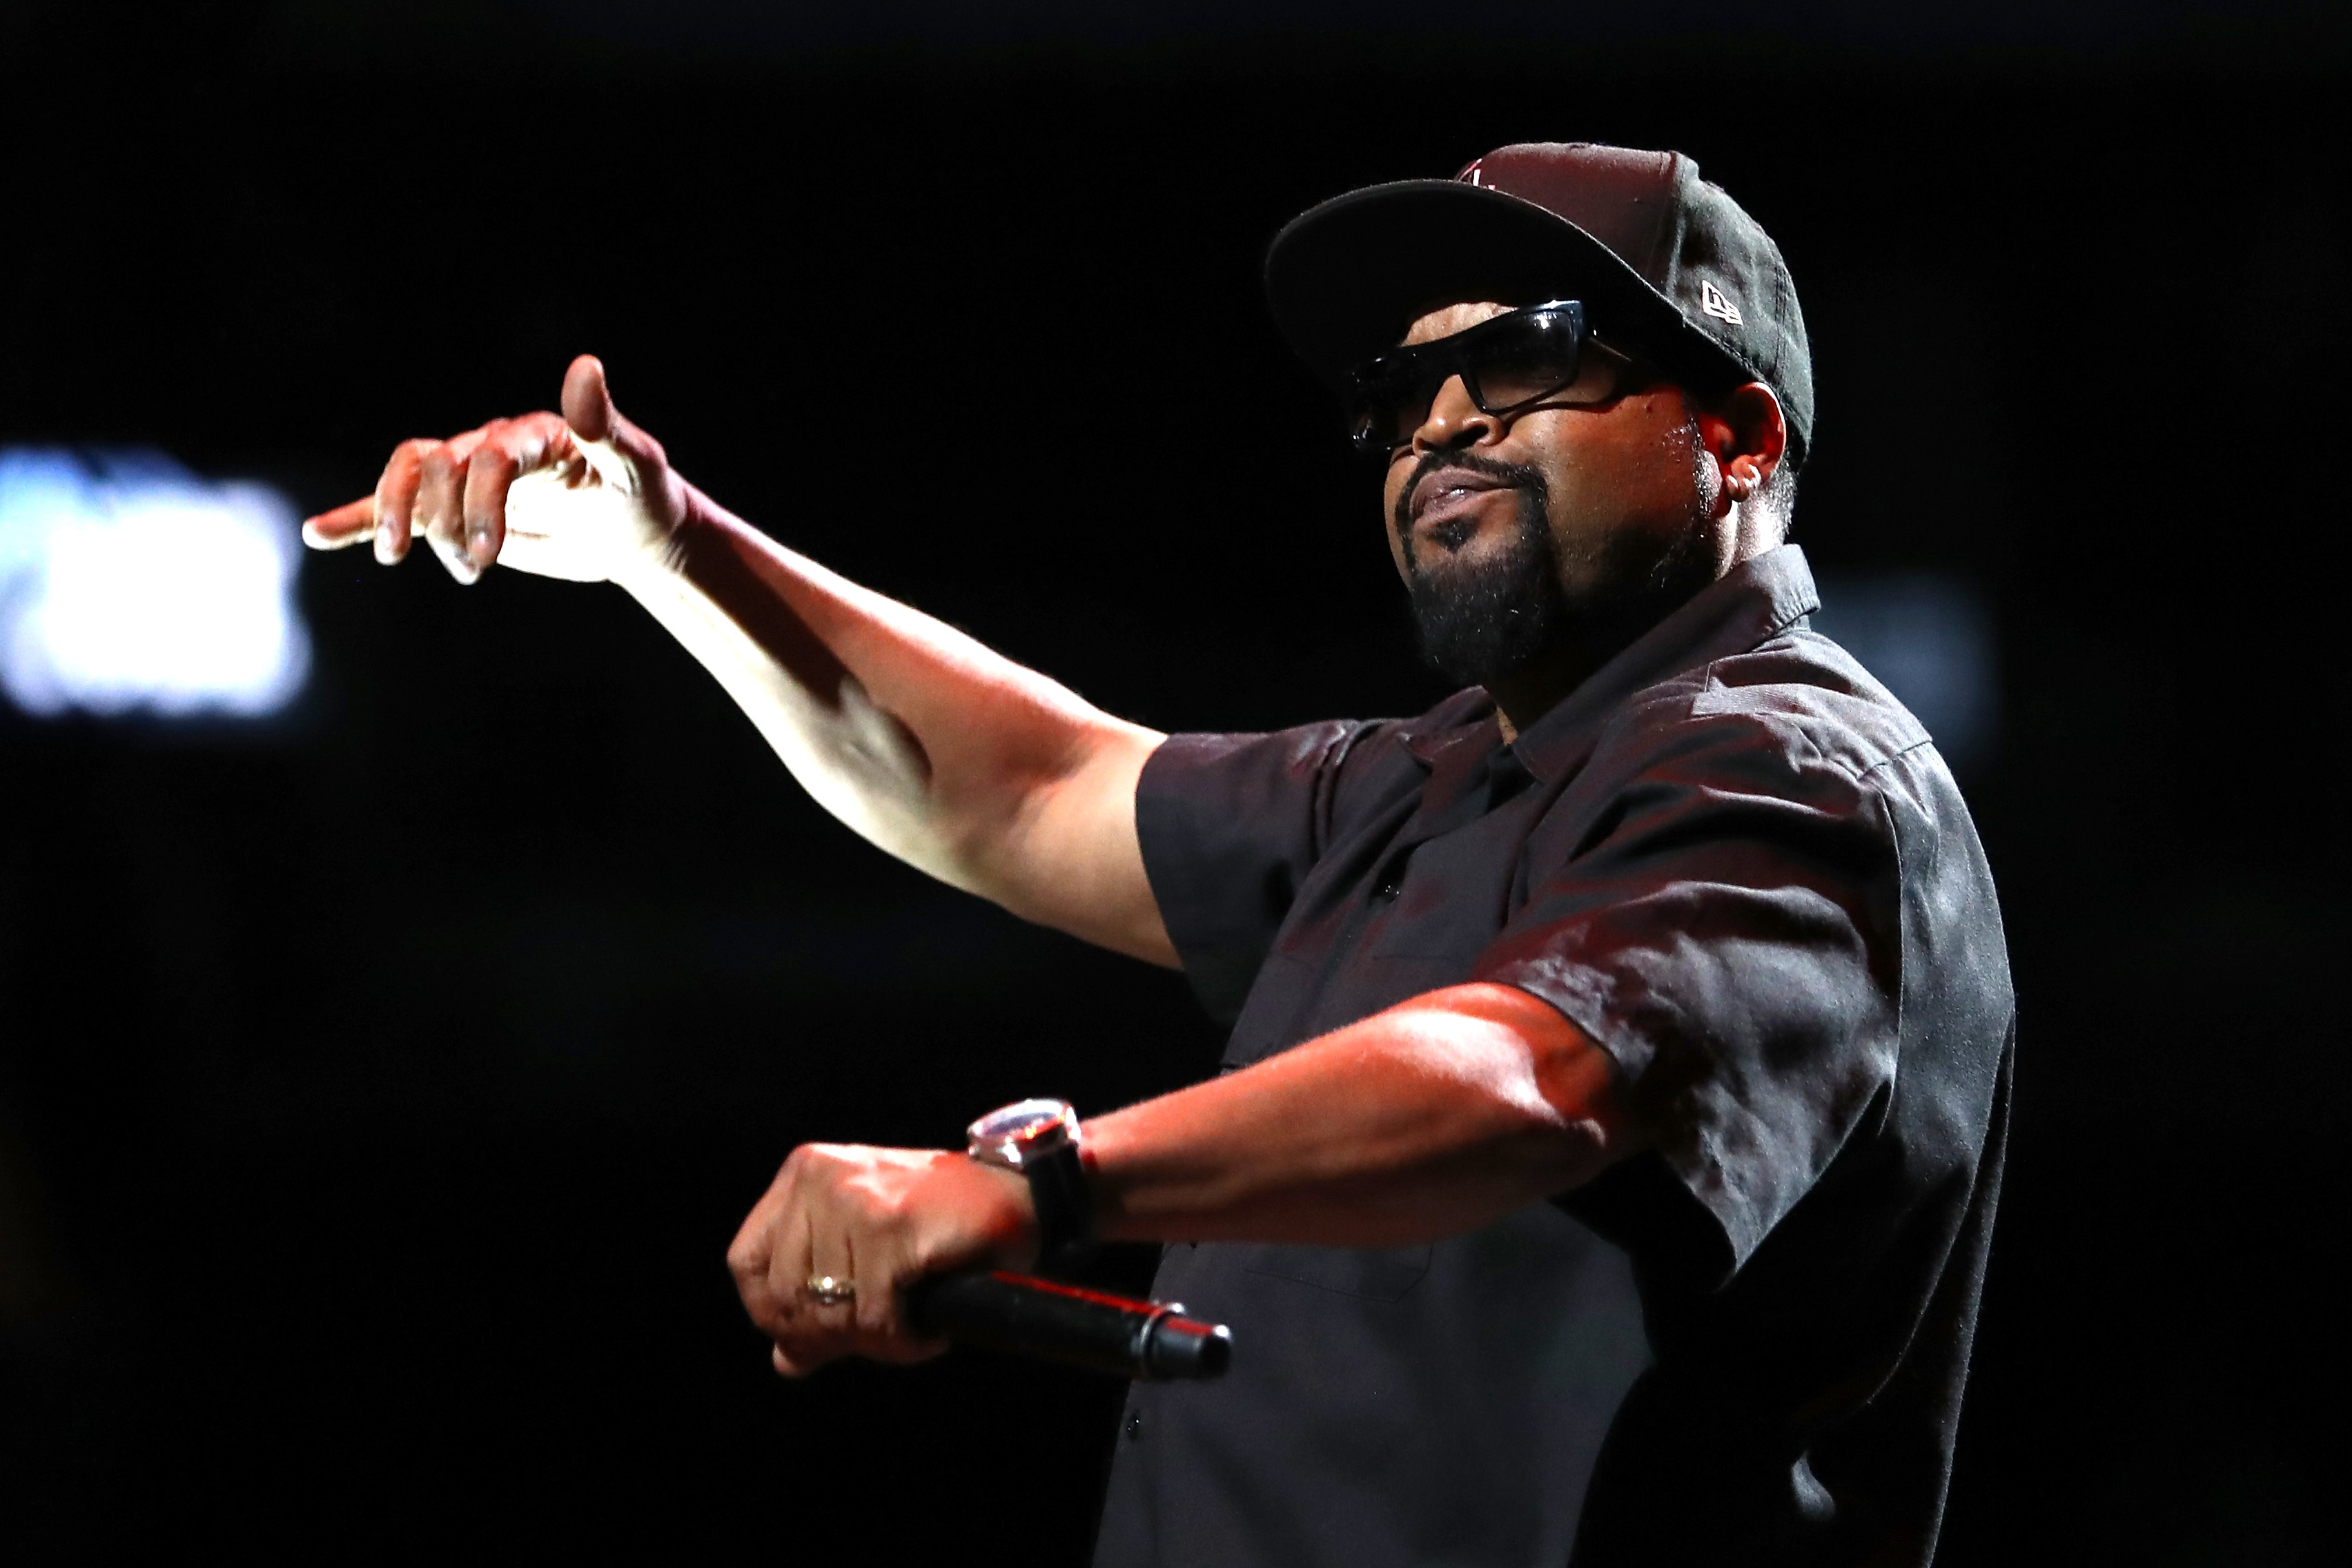 Ice Cube & Chuck D Clap Back At Writer Who Dissed BIG3 Basketball League